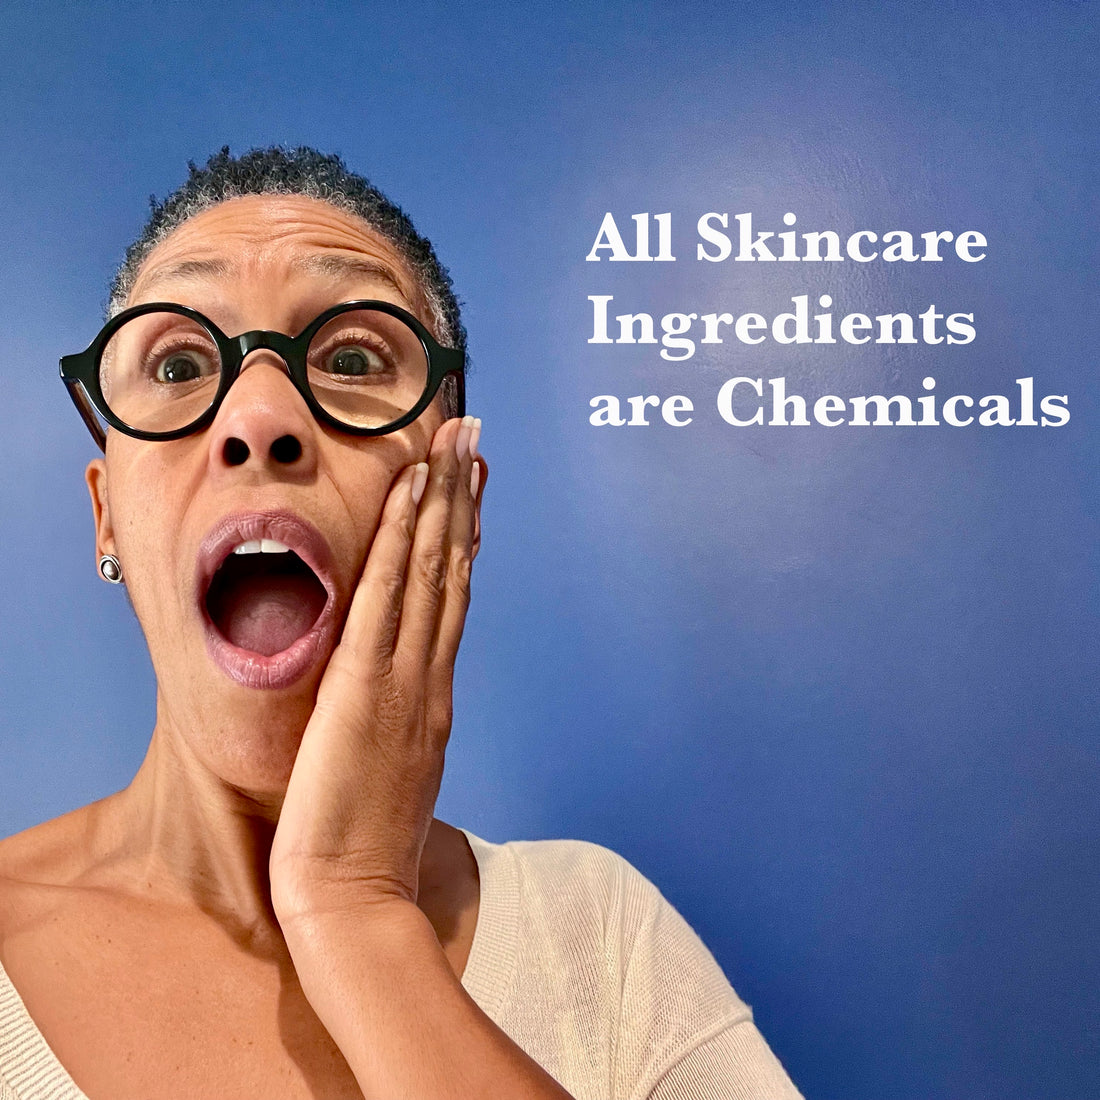 Work With Me Wednesday: All Skincare Ingredients Are Chemicals